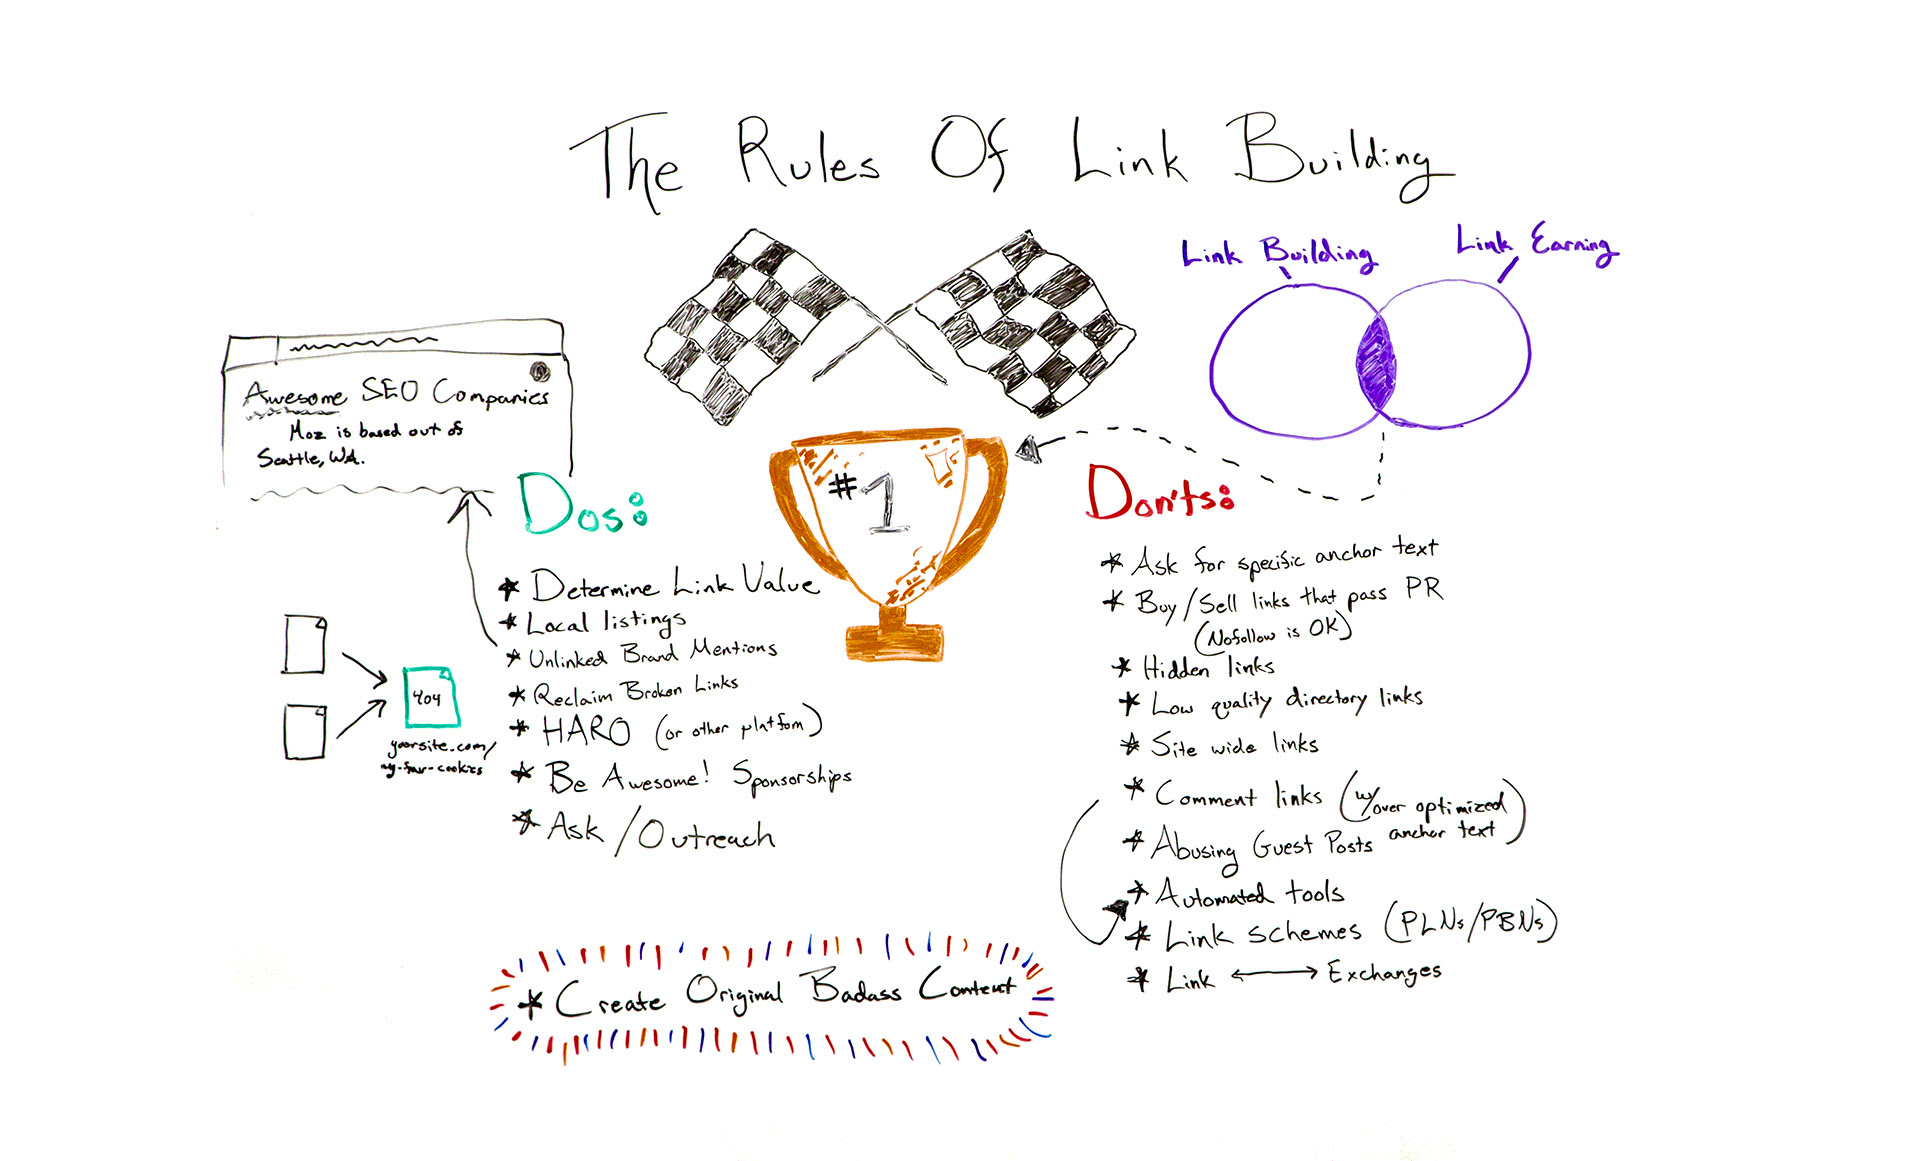 The Rules of Link Building